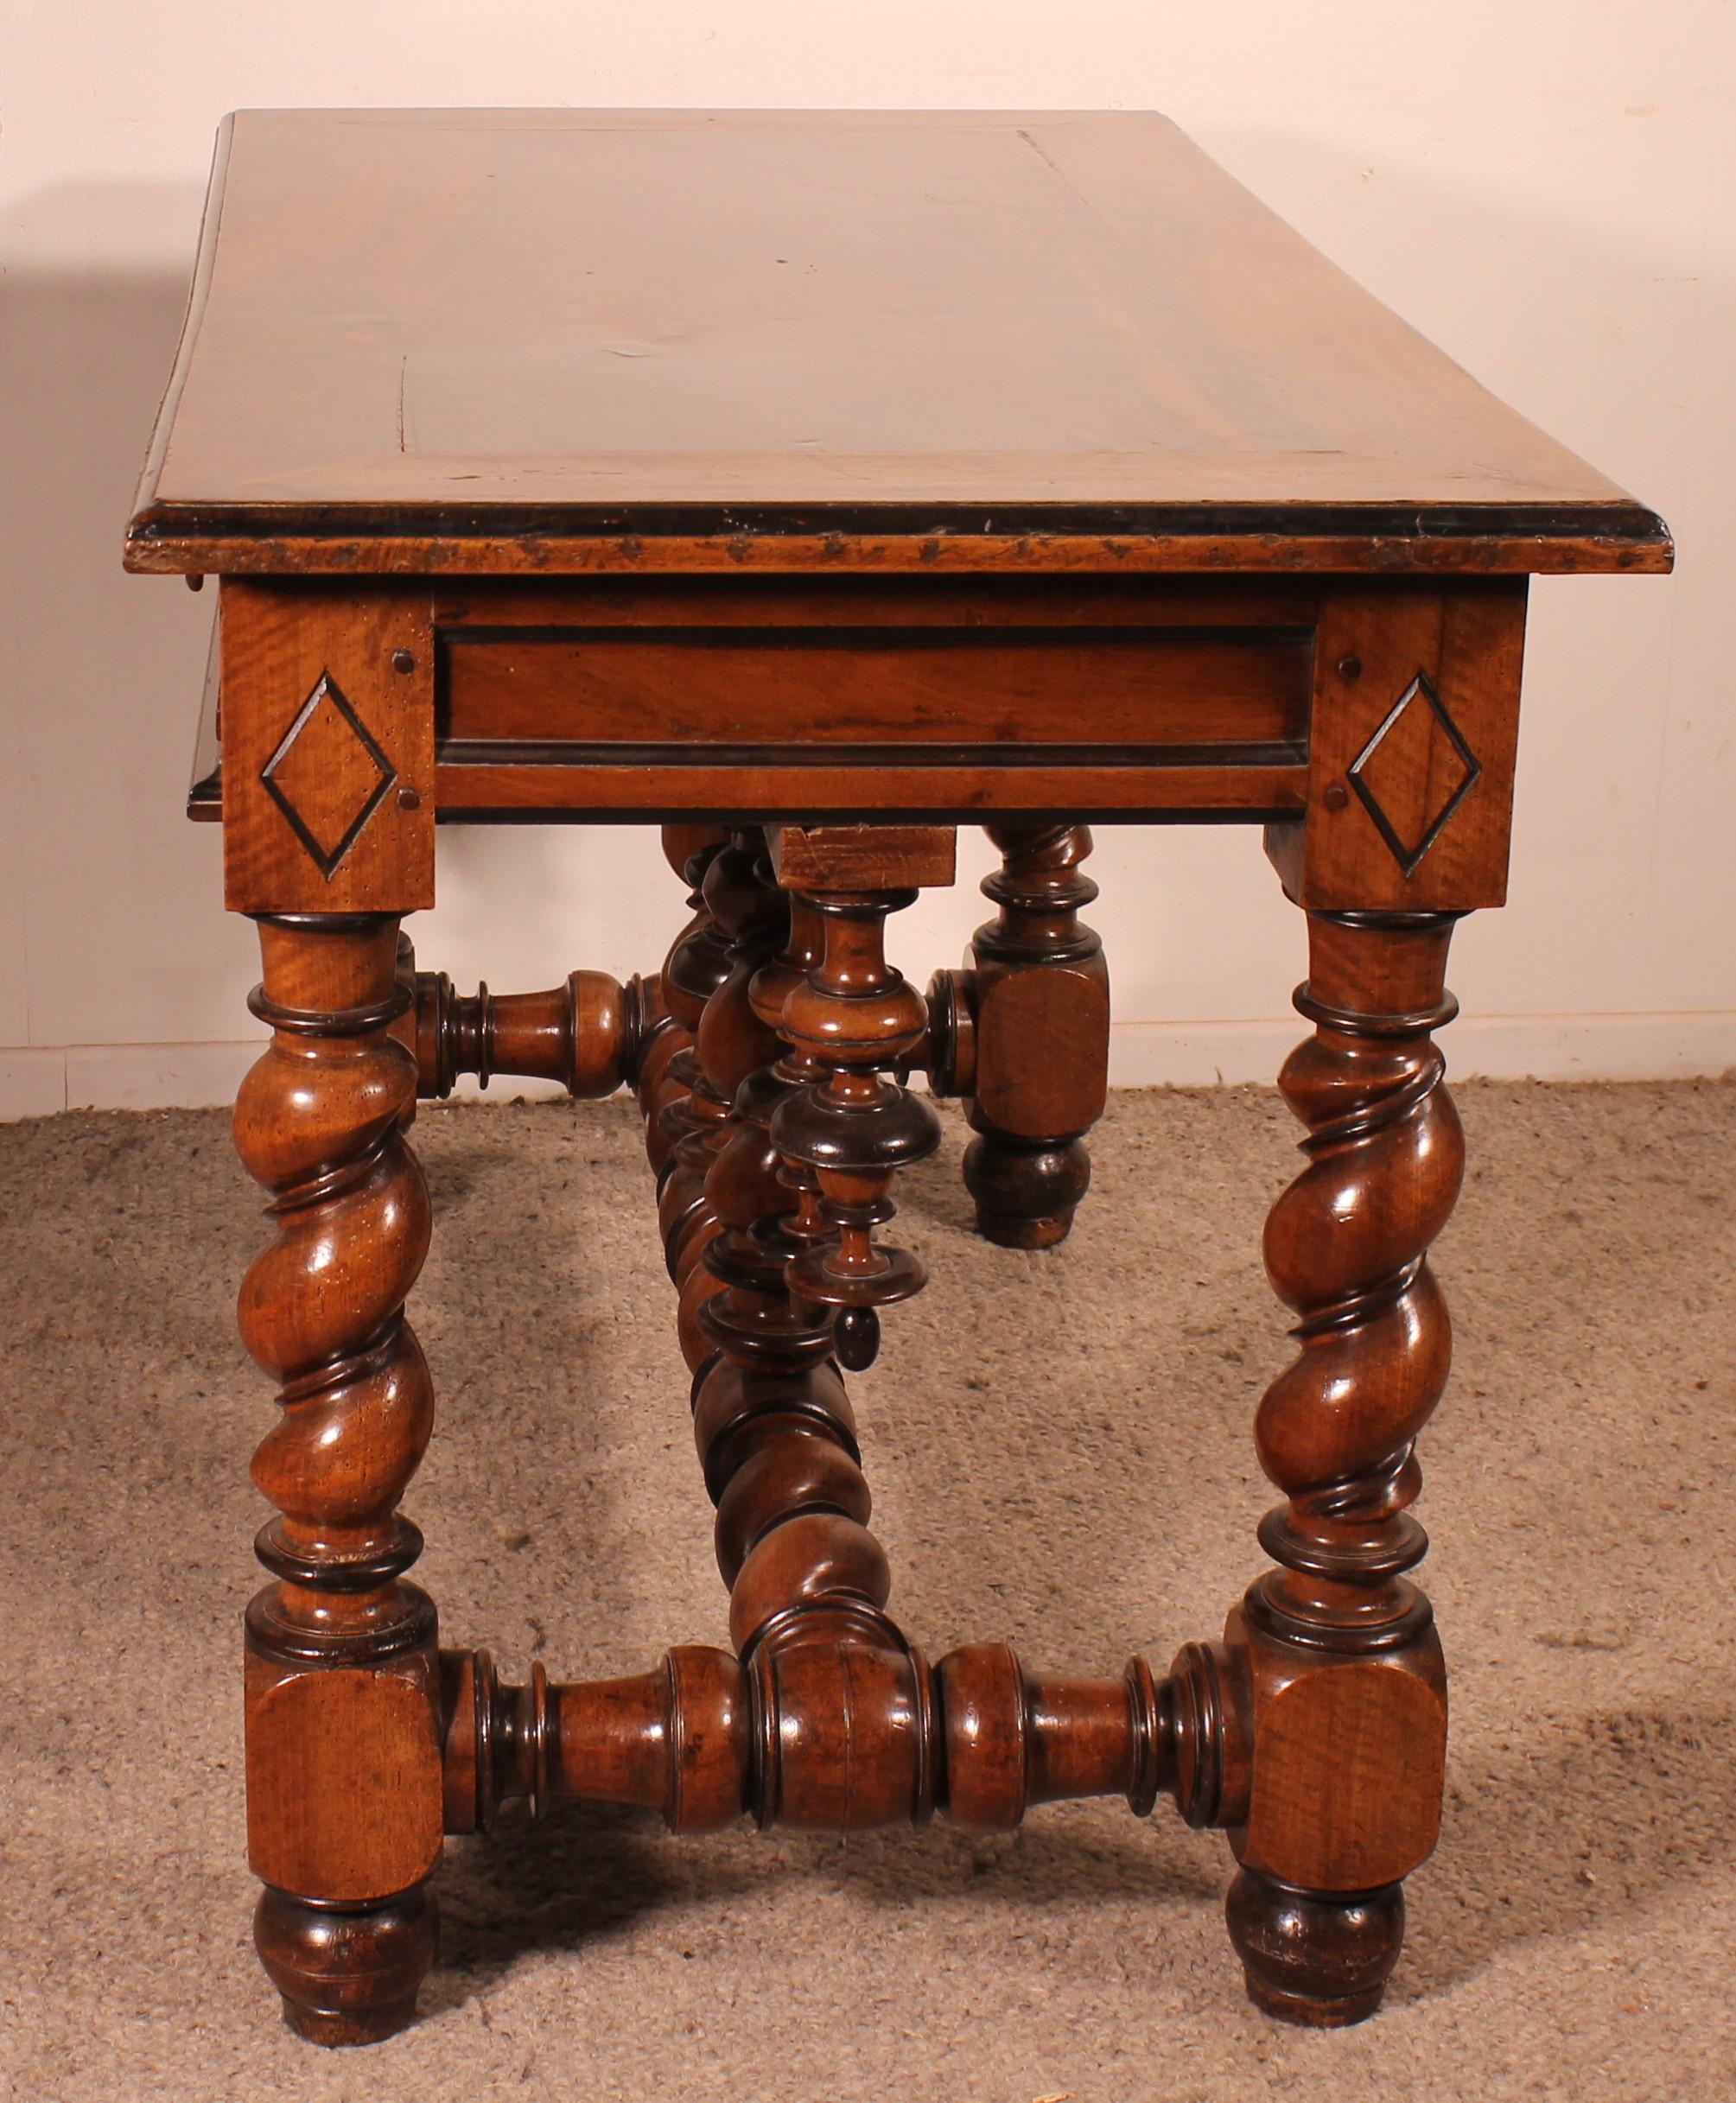 Louis XIII Period Center Table Or Console In Walnut -early 17 Century For Sale 6